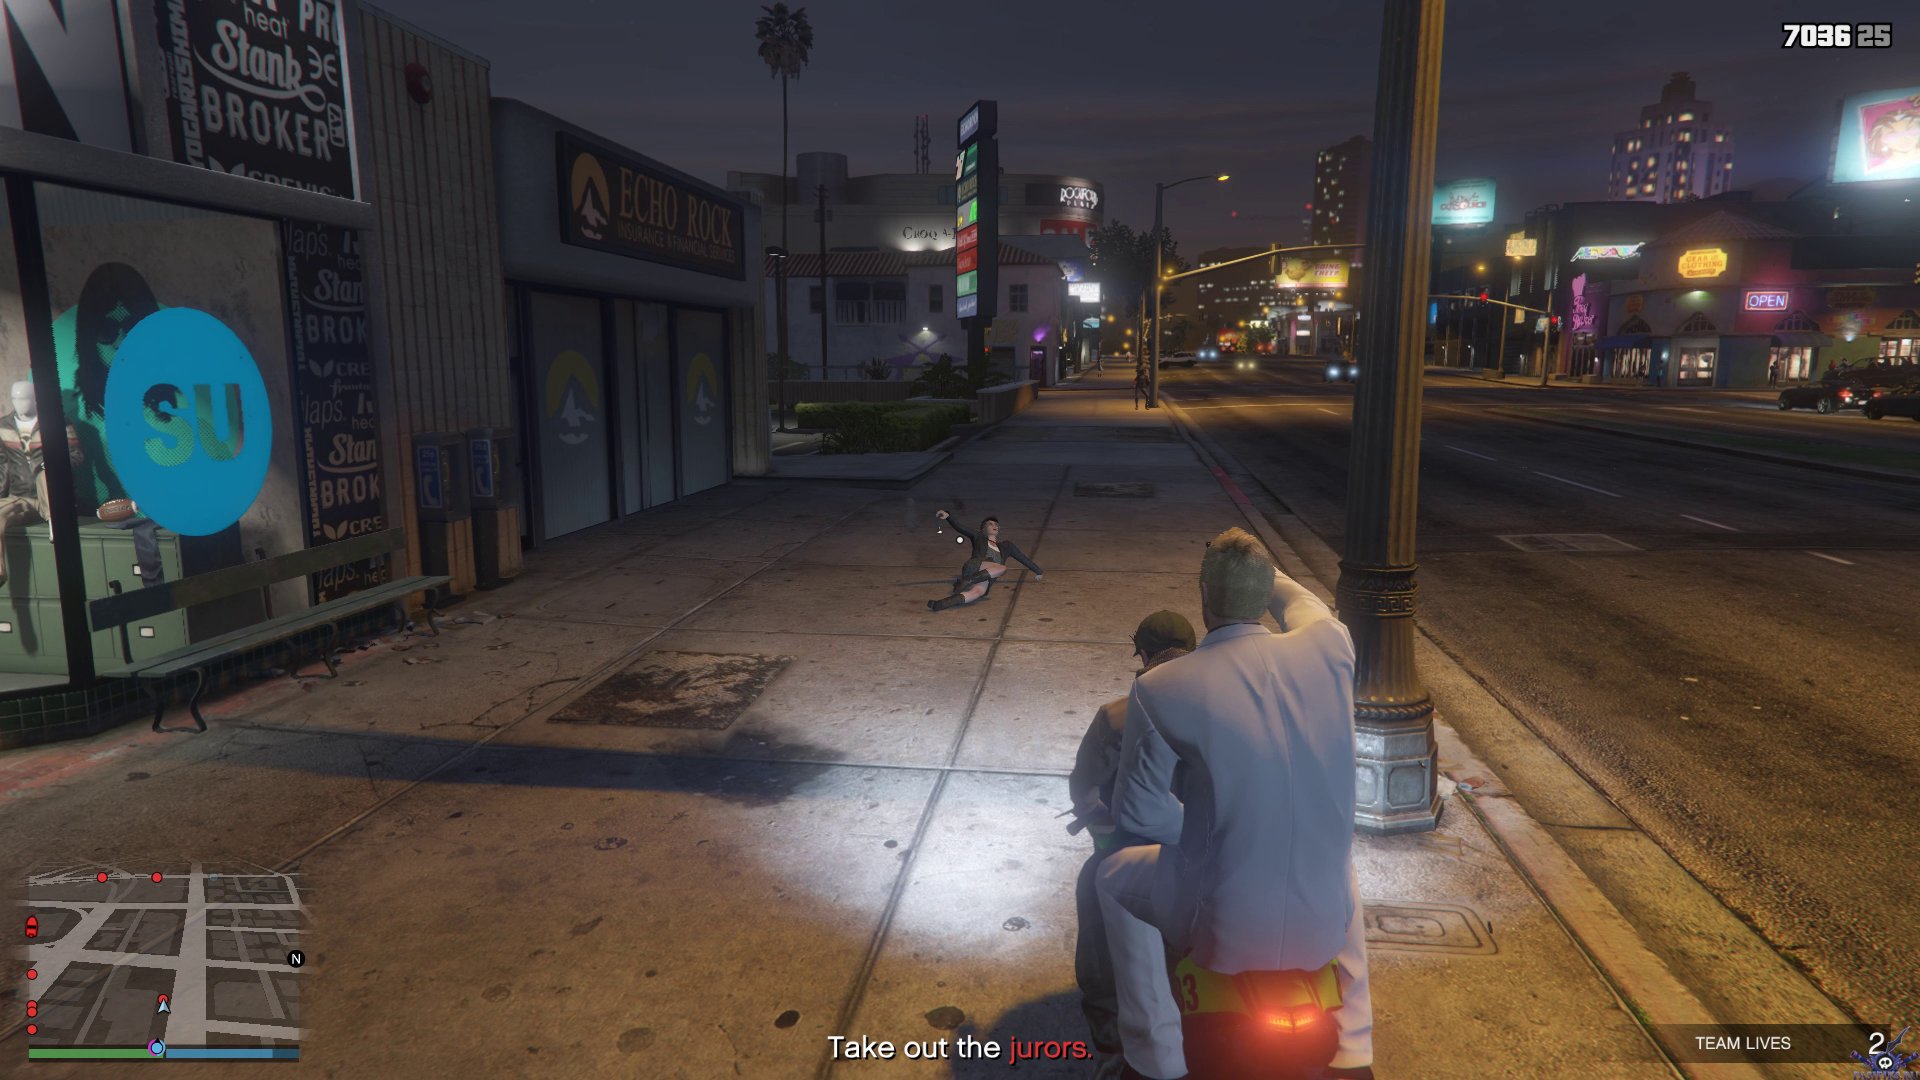 Gta 5 style or not фото 75